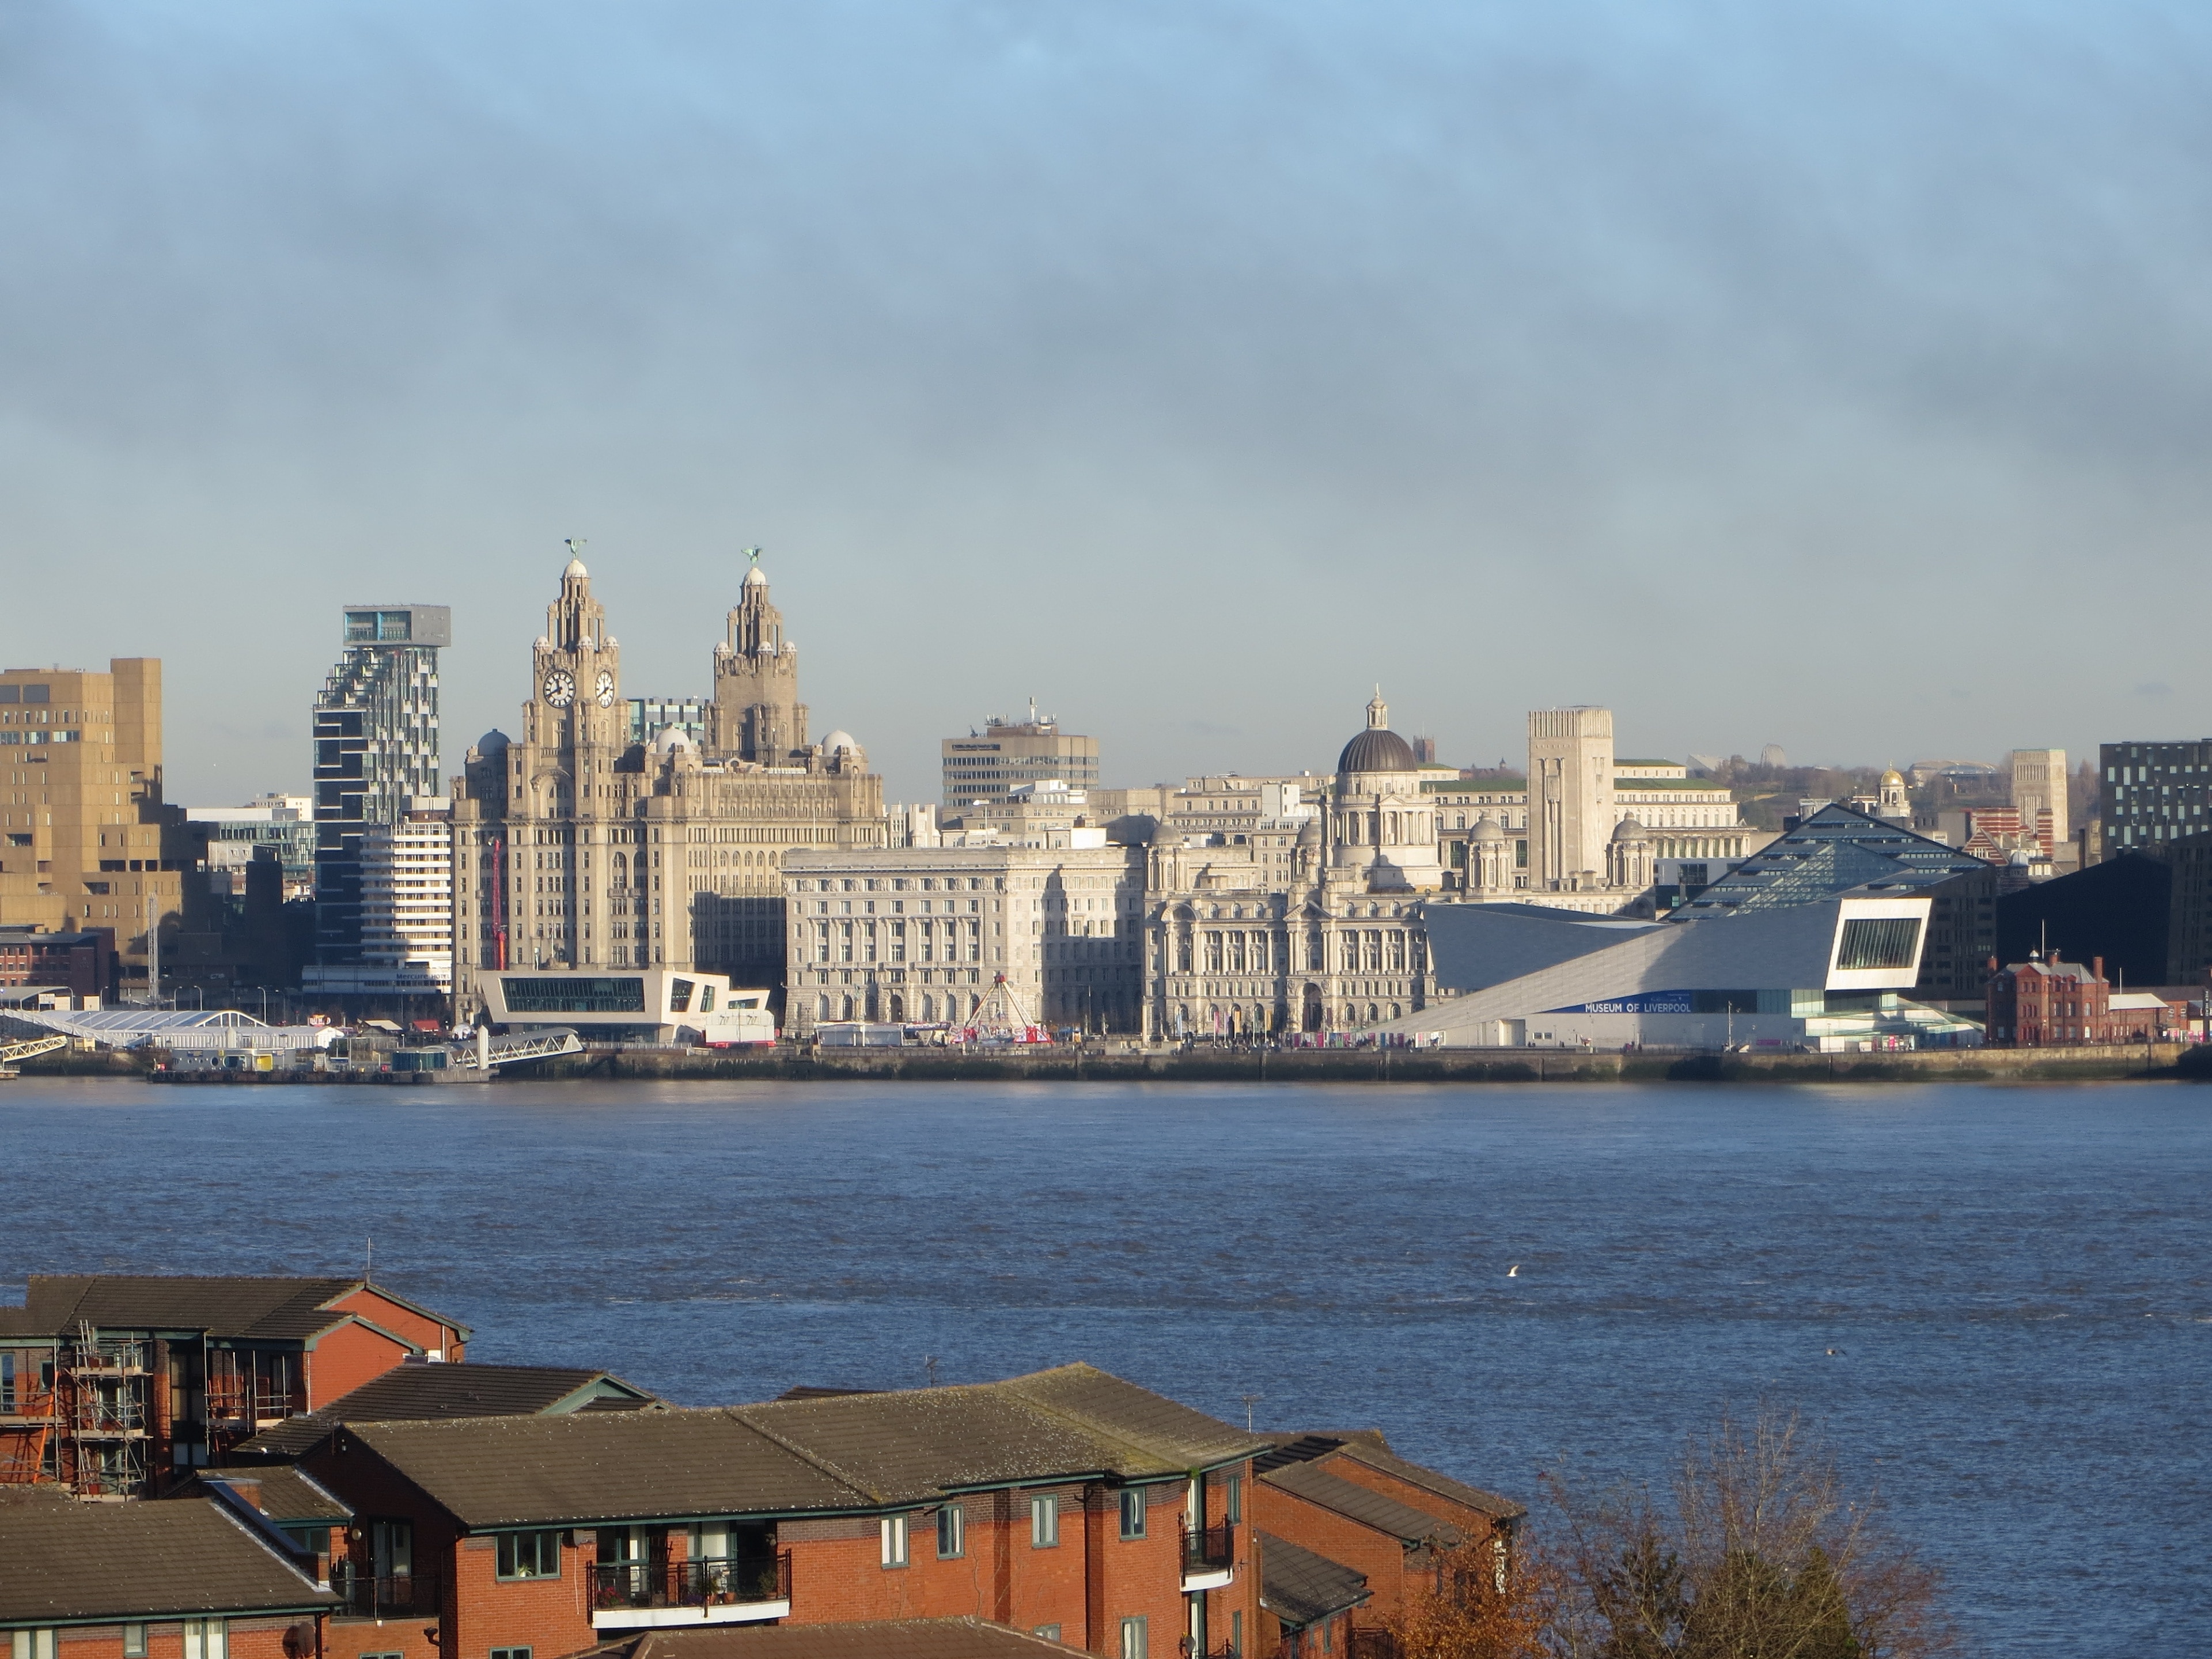 View across the Mersey from St Mary's Tower, Birkenhead.